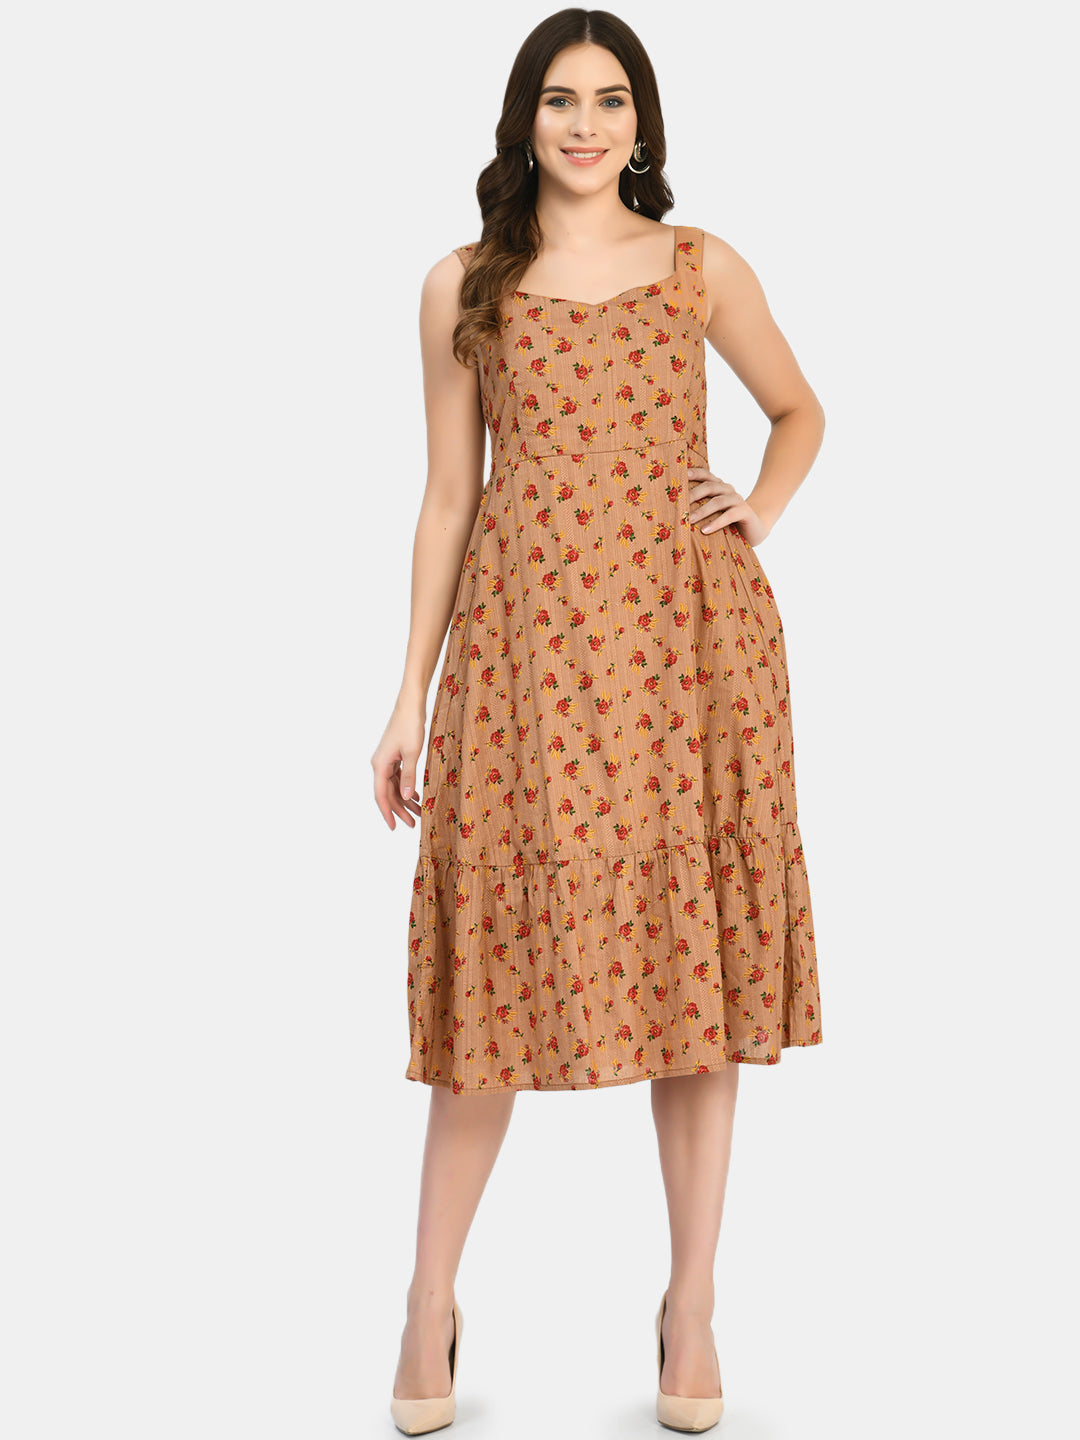 Brown Floral Maternity Dress